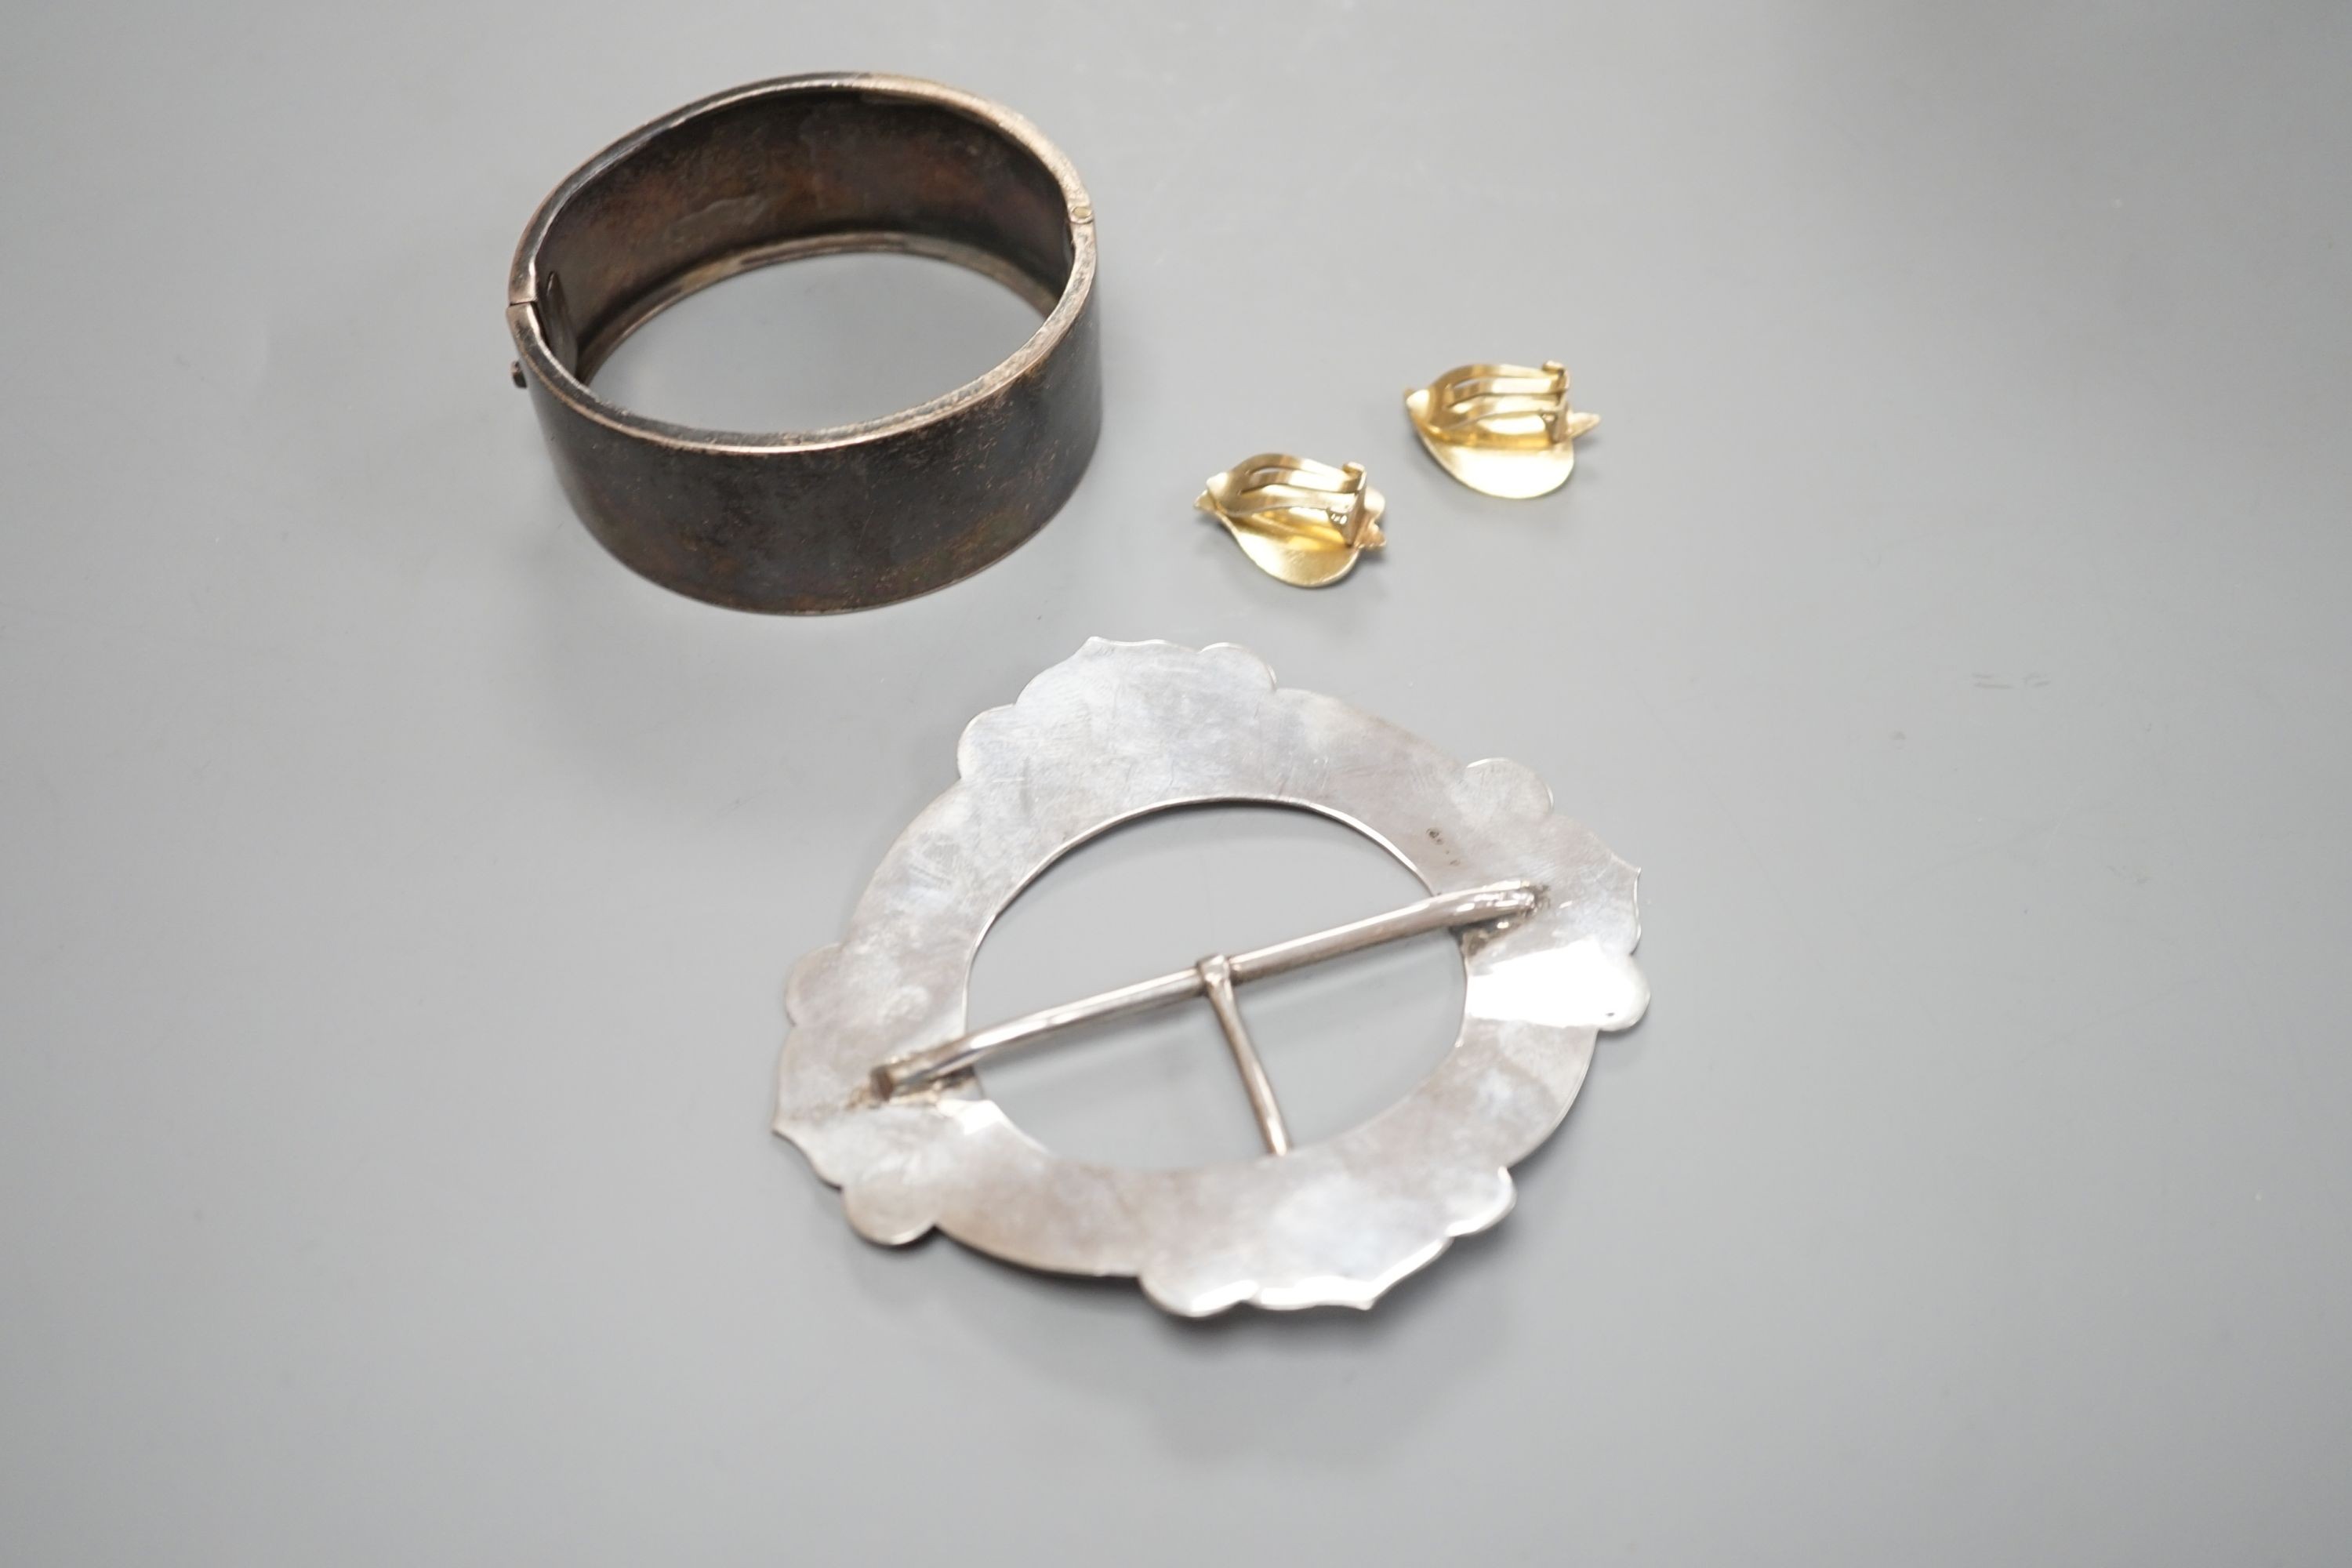 A late Victorian engraved silver hinged bangle, a white metal and niello buckle and a pair of mid 20th century Norwegian gilt 925 and enamel leaf ear clips by Hans Myhre.